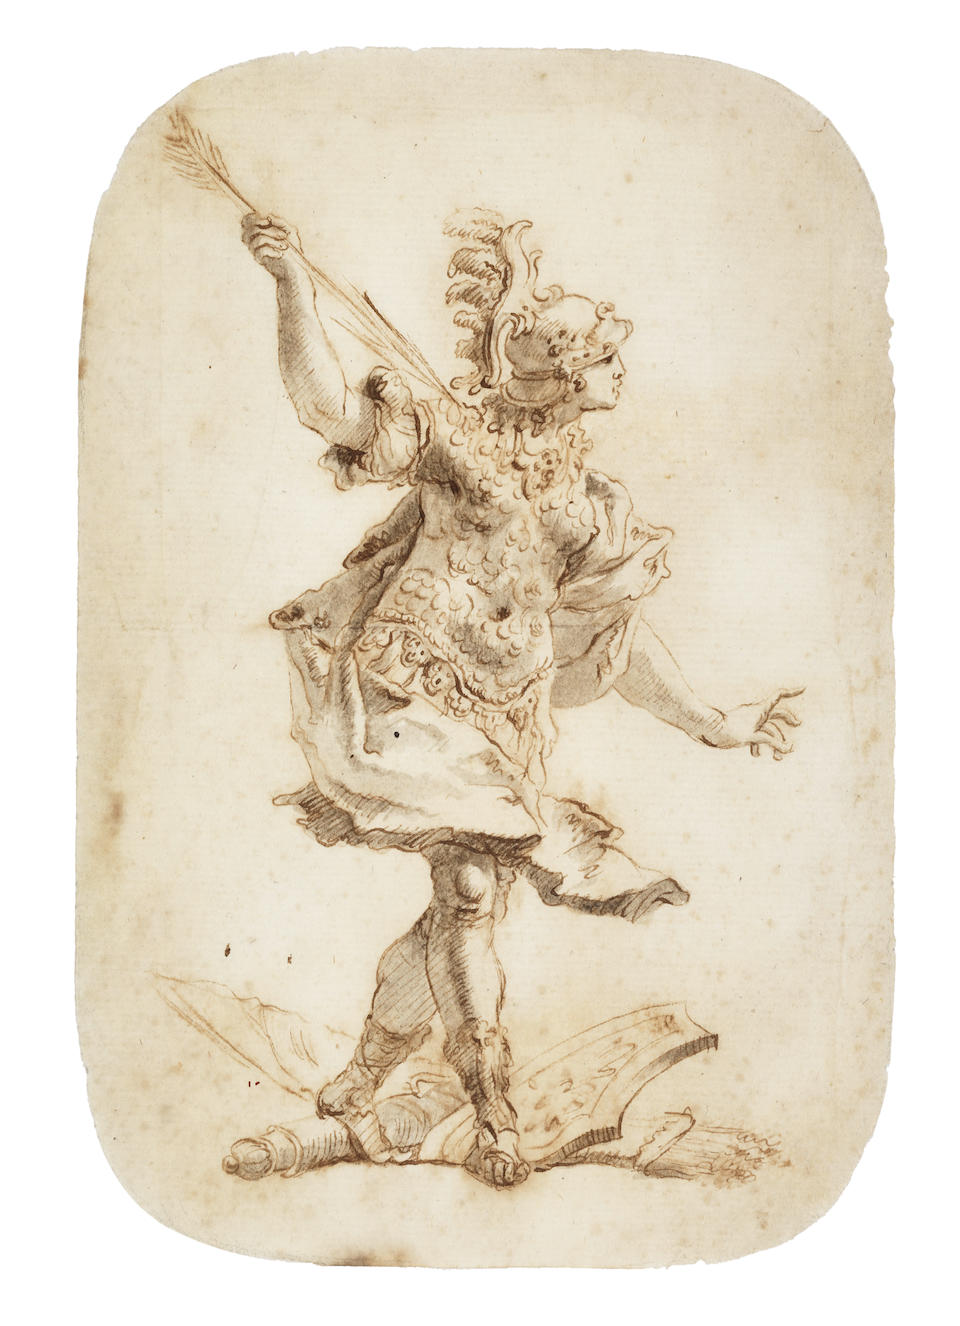 Italian School, 18th Century A mythological female figure holding an arrow, possibly Minerva unframed (together with a drawing of two figures (2))